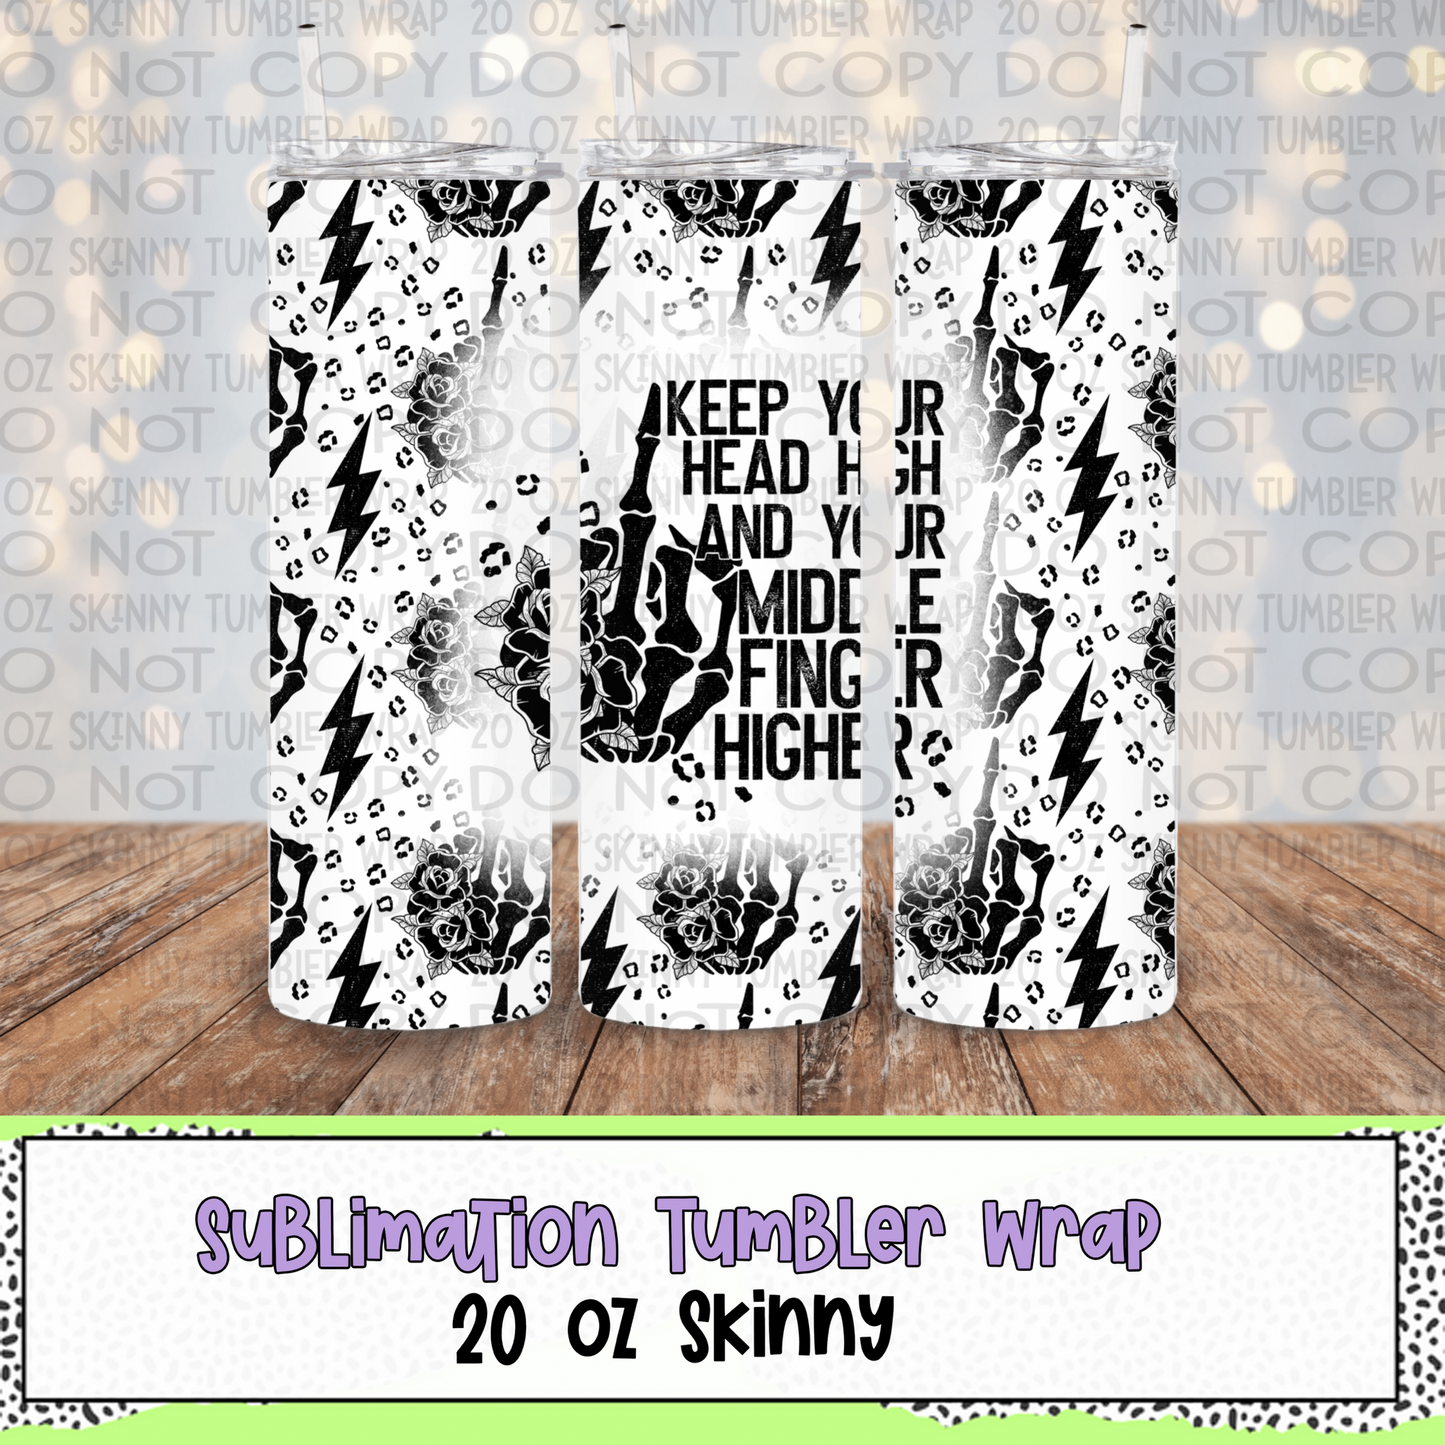 Keep Your Middle Finger Higher 20 Oz Skinny Tumbler Wrap - Sublimation Transfer - RTS